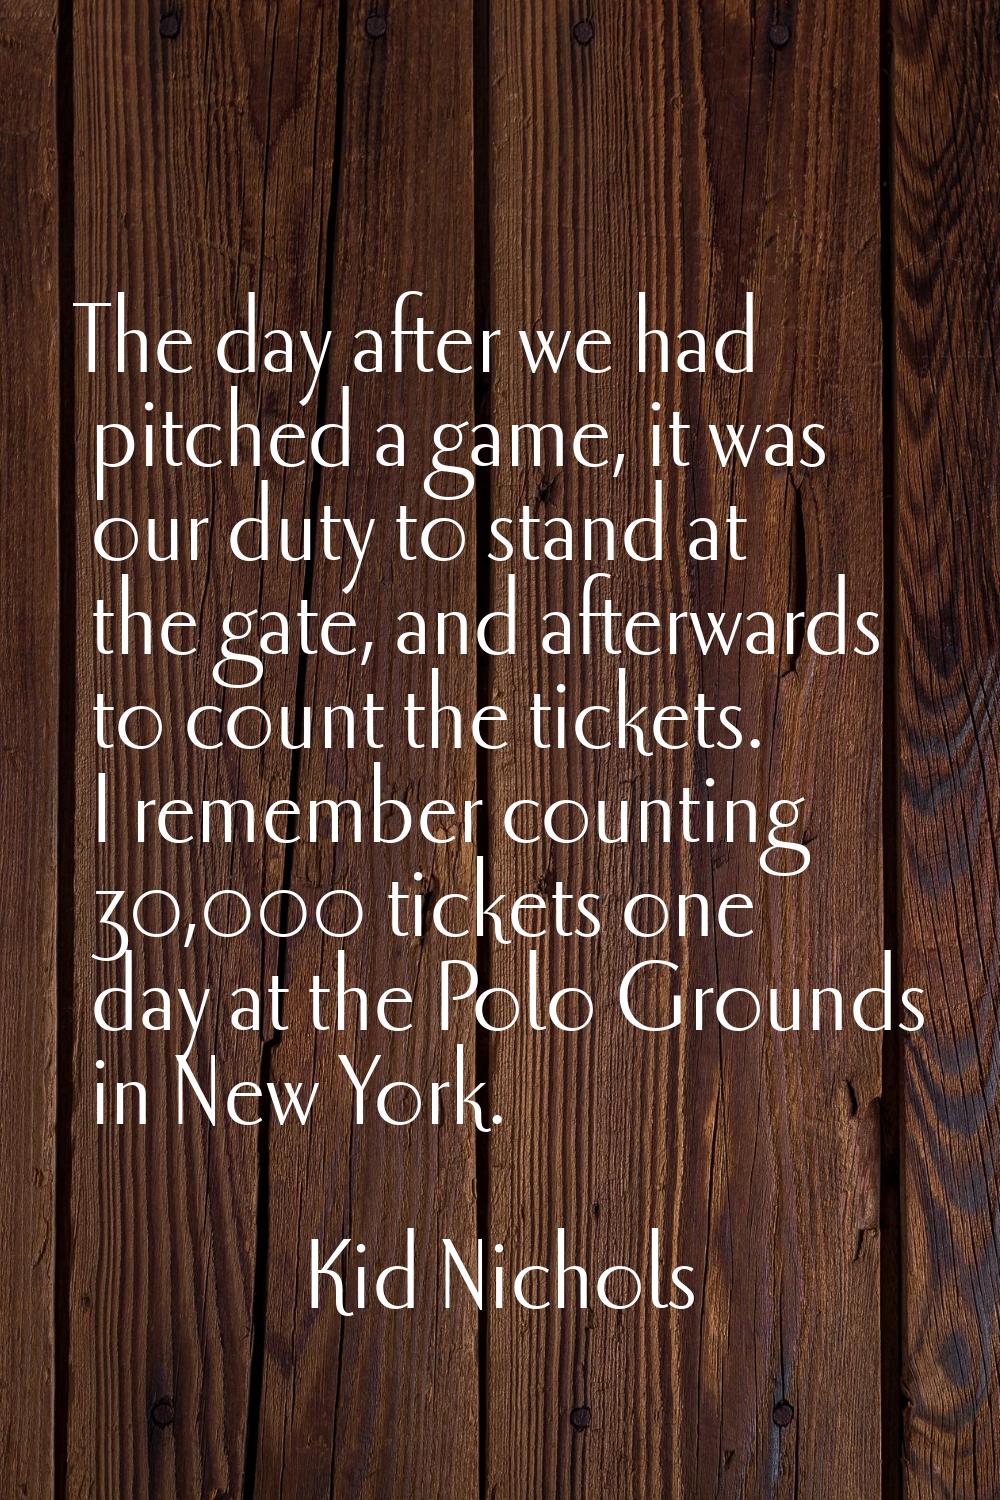 The day after we had pitched a game, it was our duty to stand at the gate, and afterwards to count 